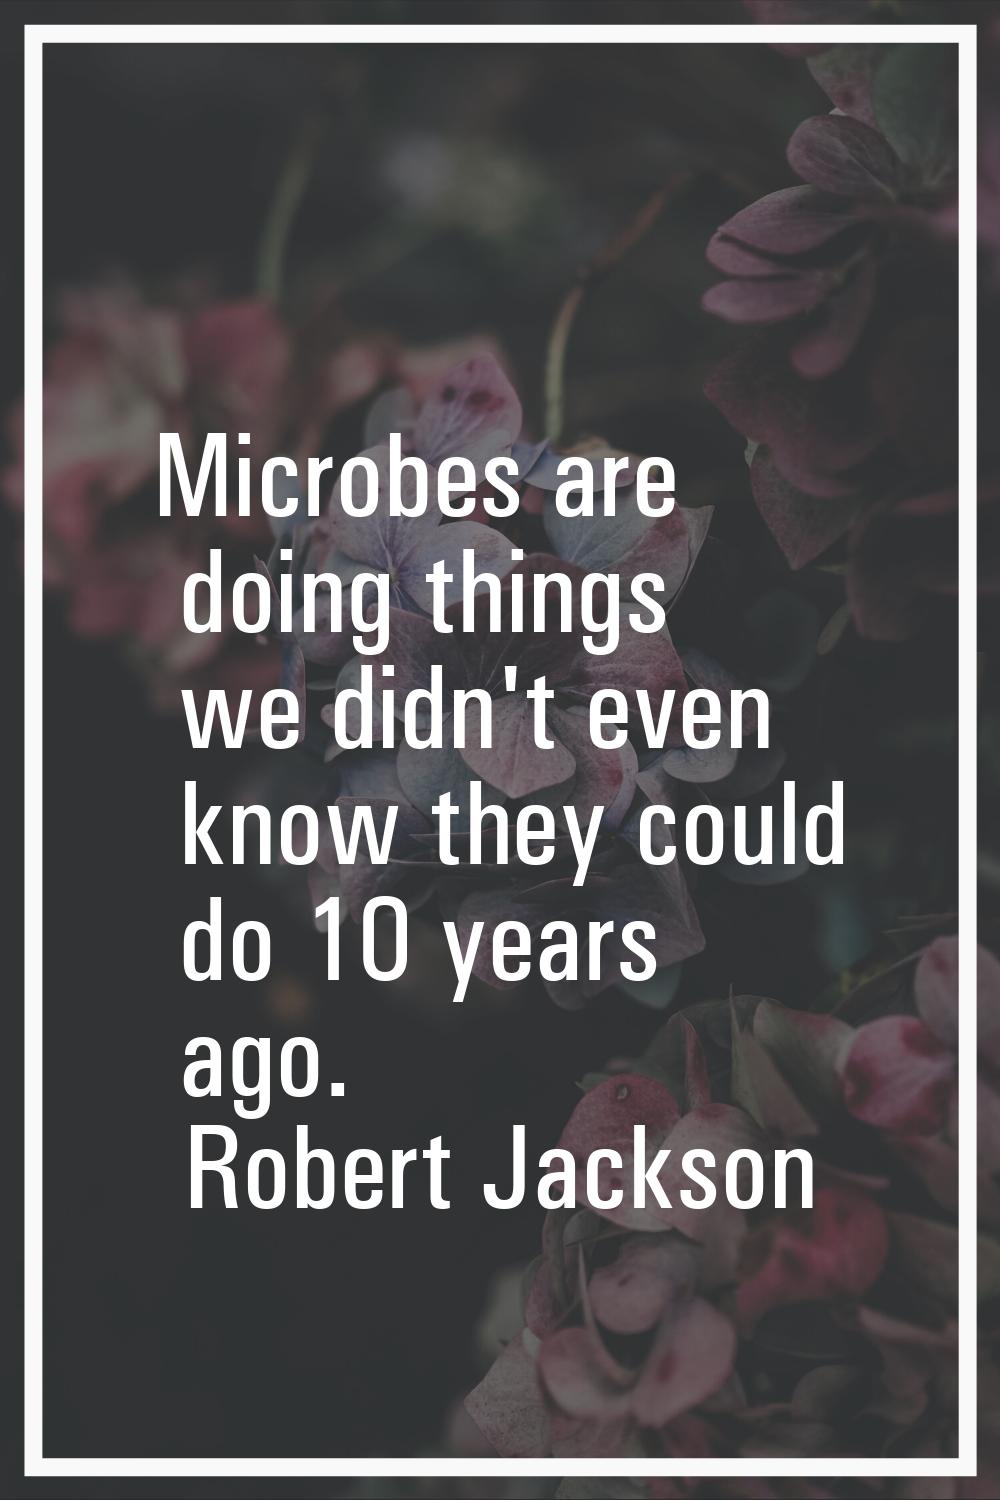 Microbes are doing things we didn't even know they could do 10 years ago.